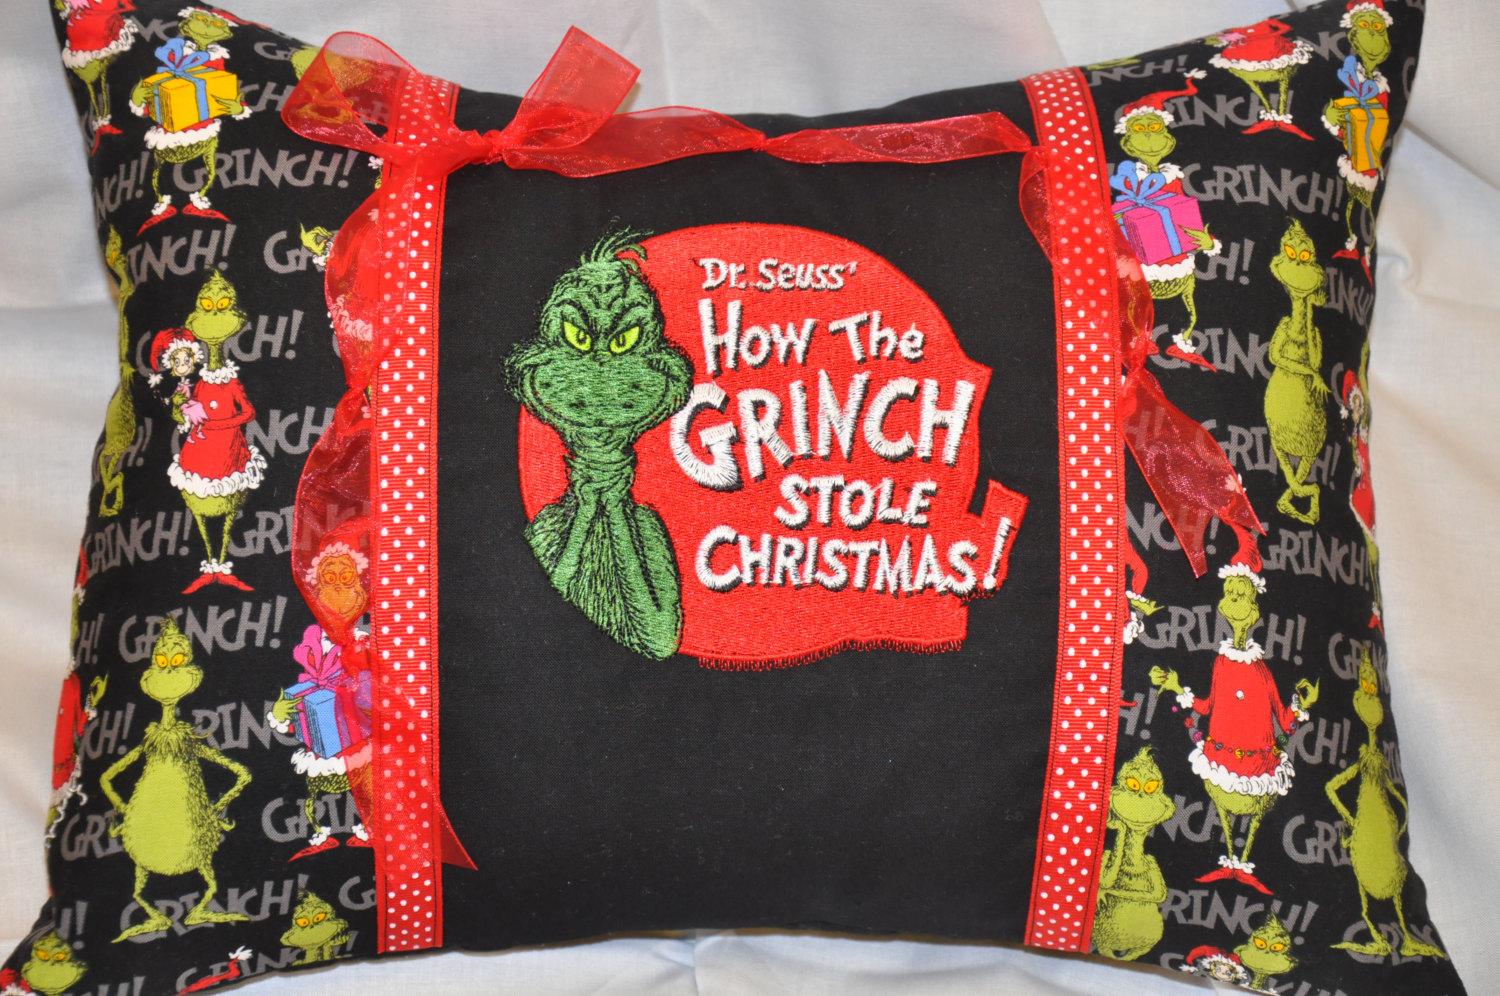 A pillow with Grinch embroidery design